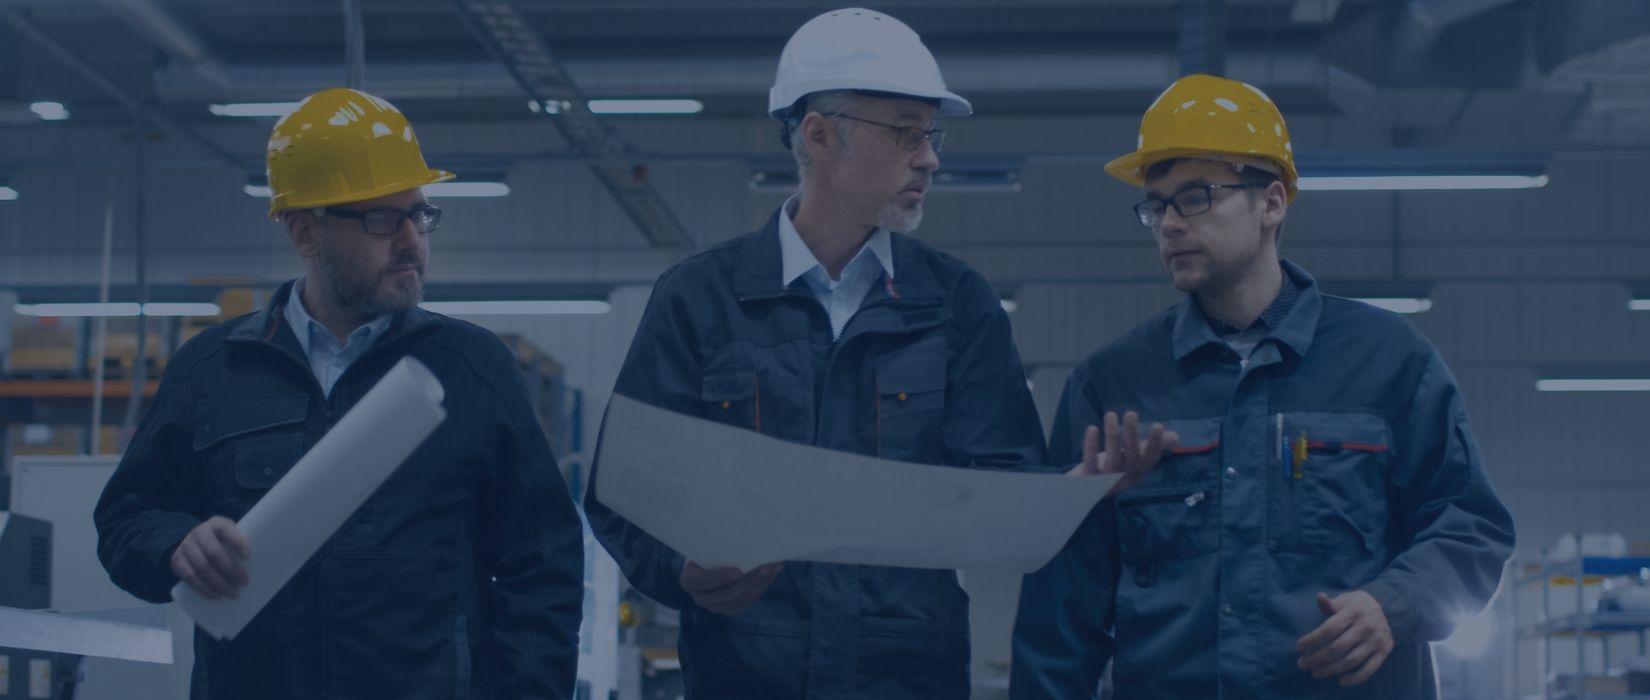 Manufacturing Recruiters: Retooling Industrial Recruiting for the Modern Age